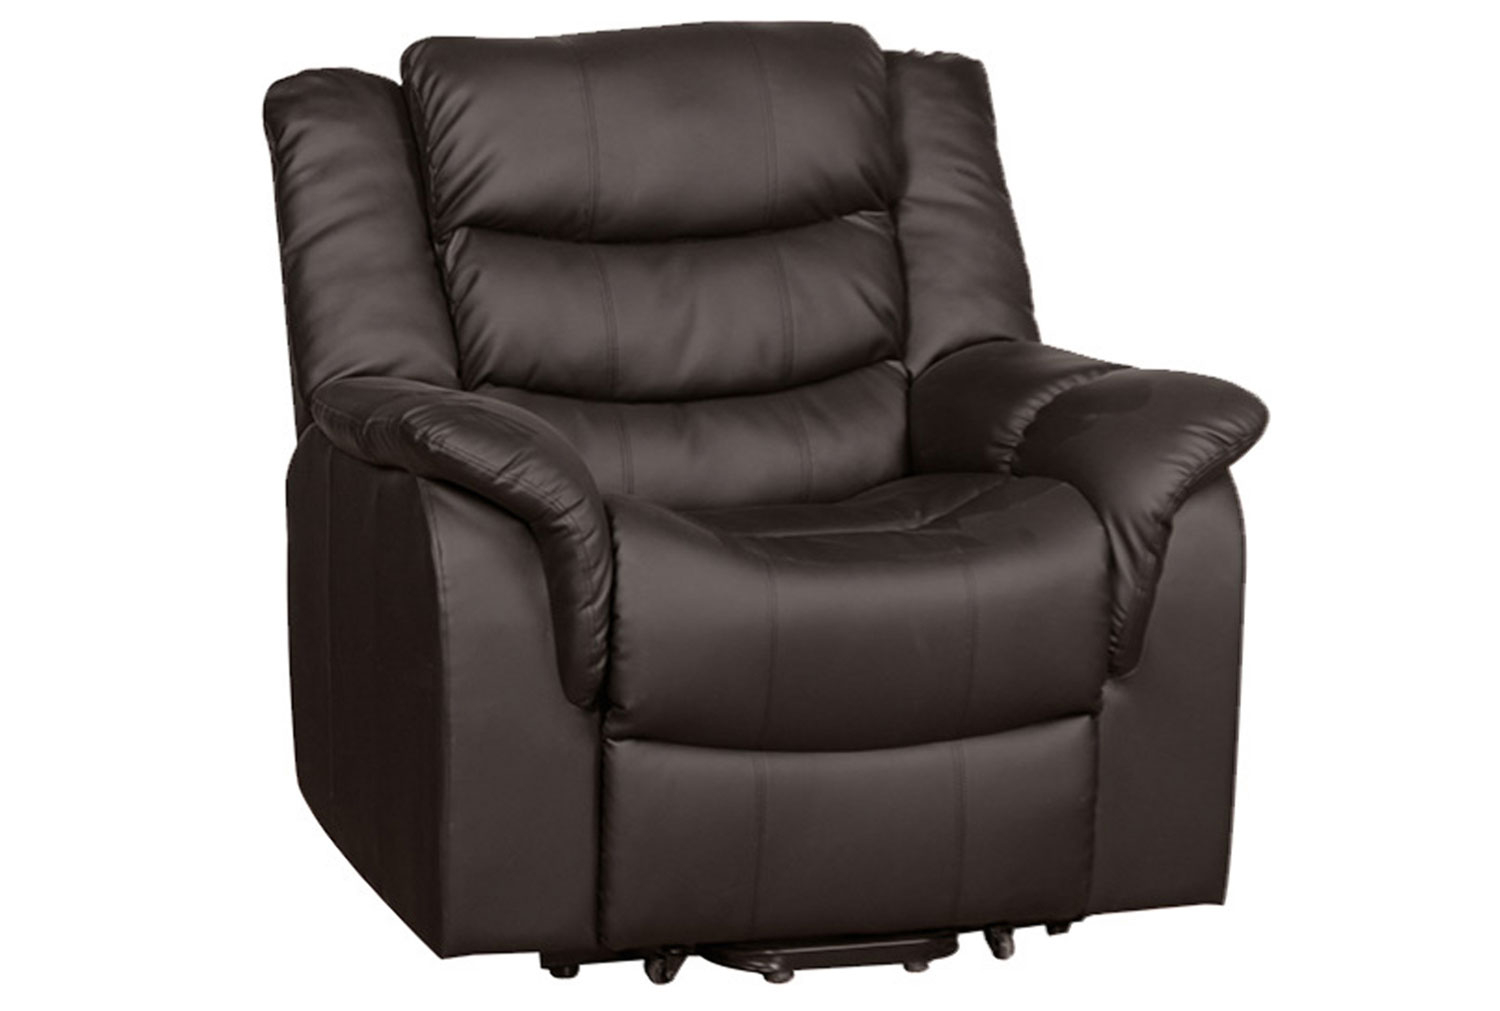 Hunter Leather Recliner Office Armchair (Brown), Manual Recliner